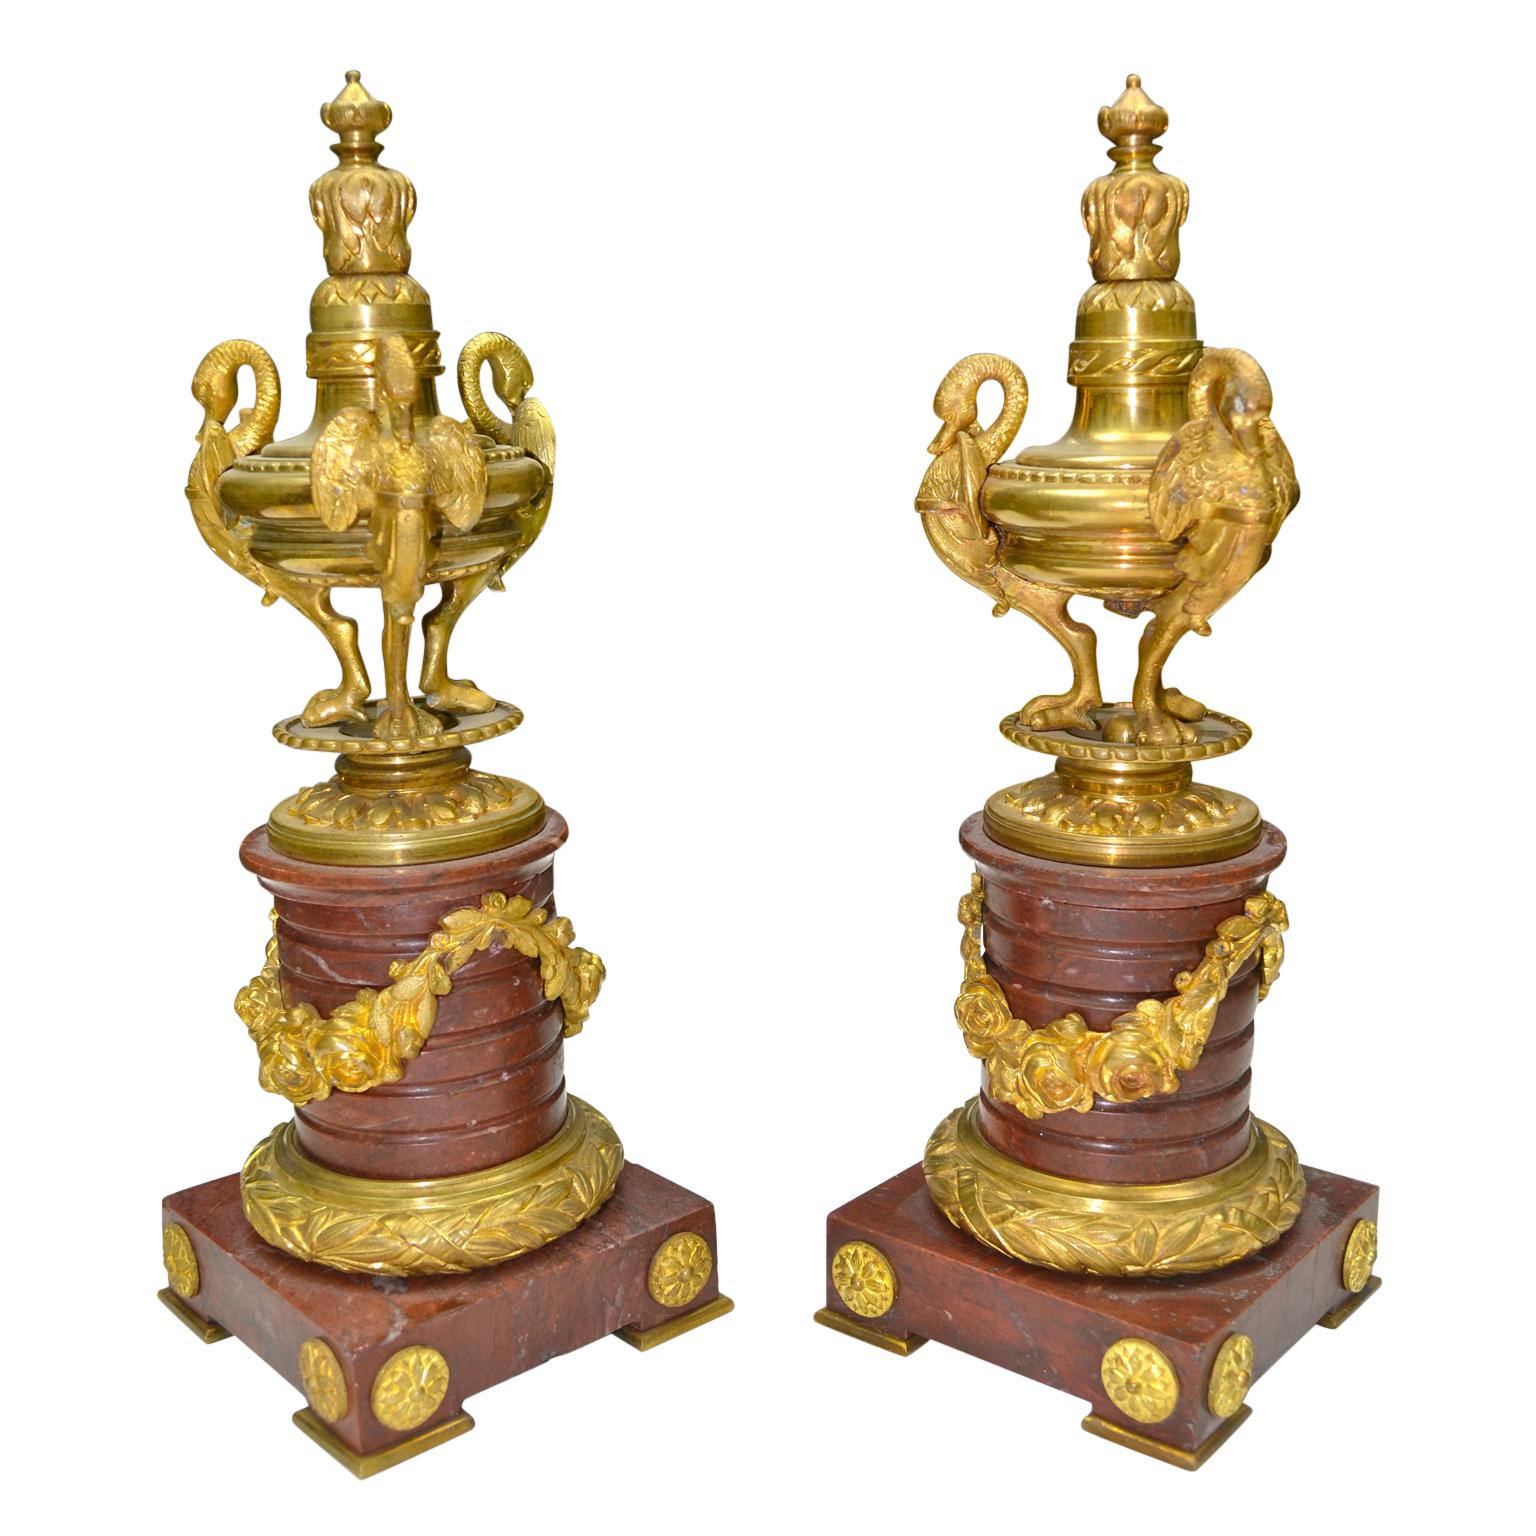 19th Century Griotte Marble and Gilt Bronze Clock Garniture with a Terracotta Nymph Statue